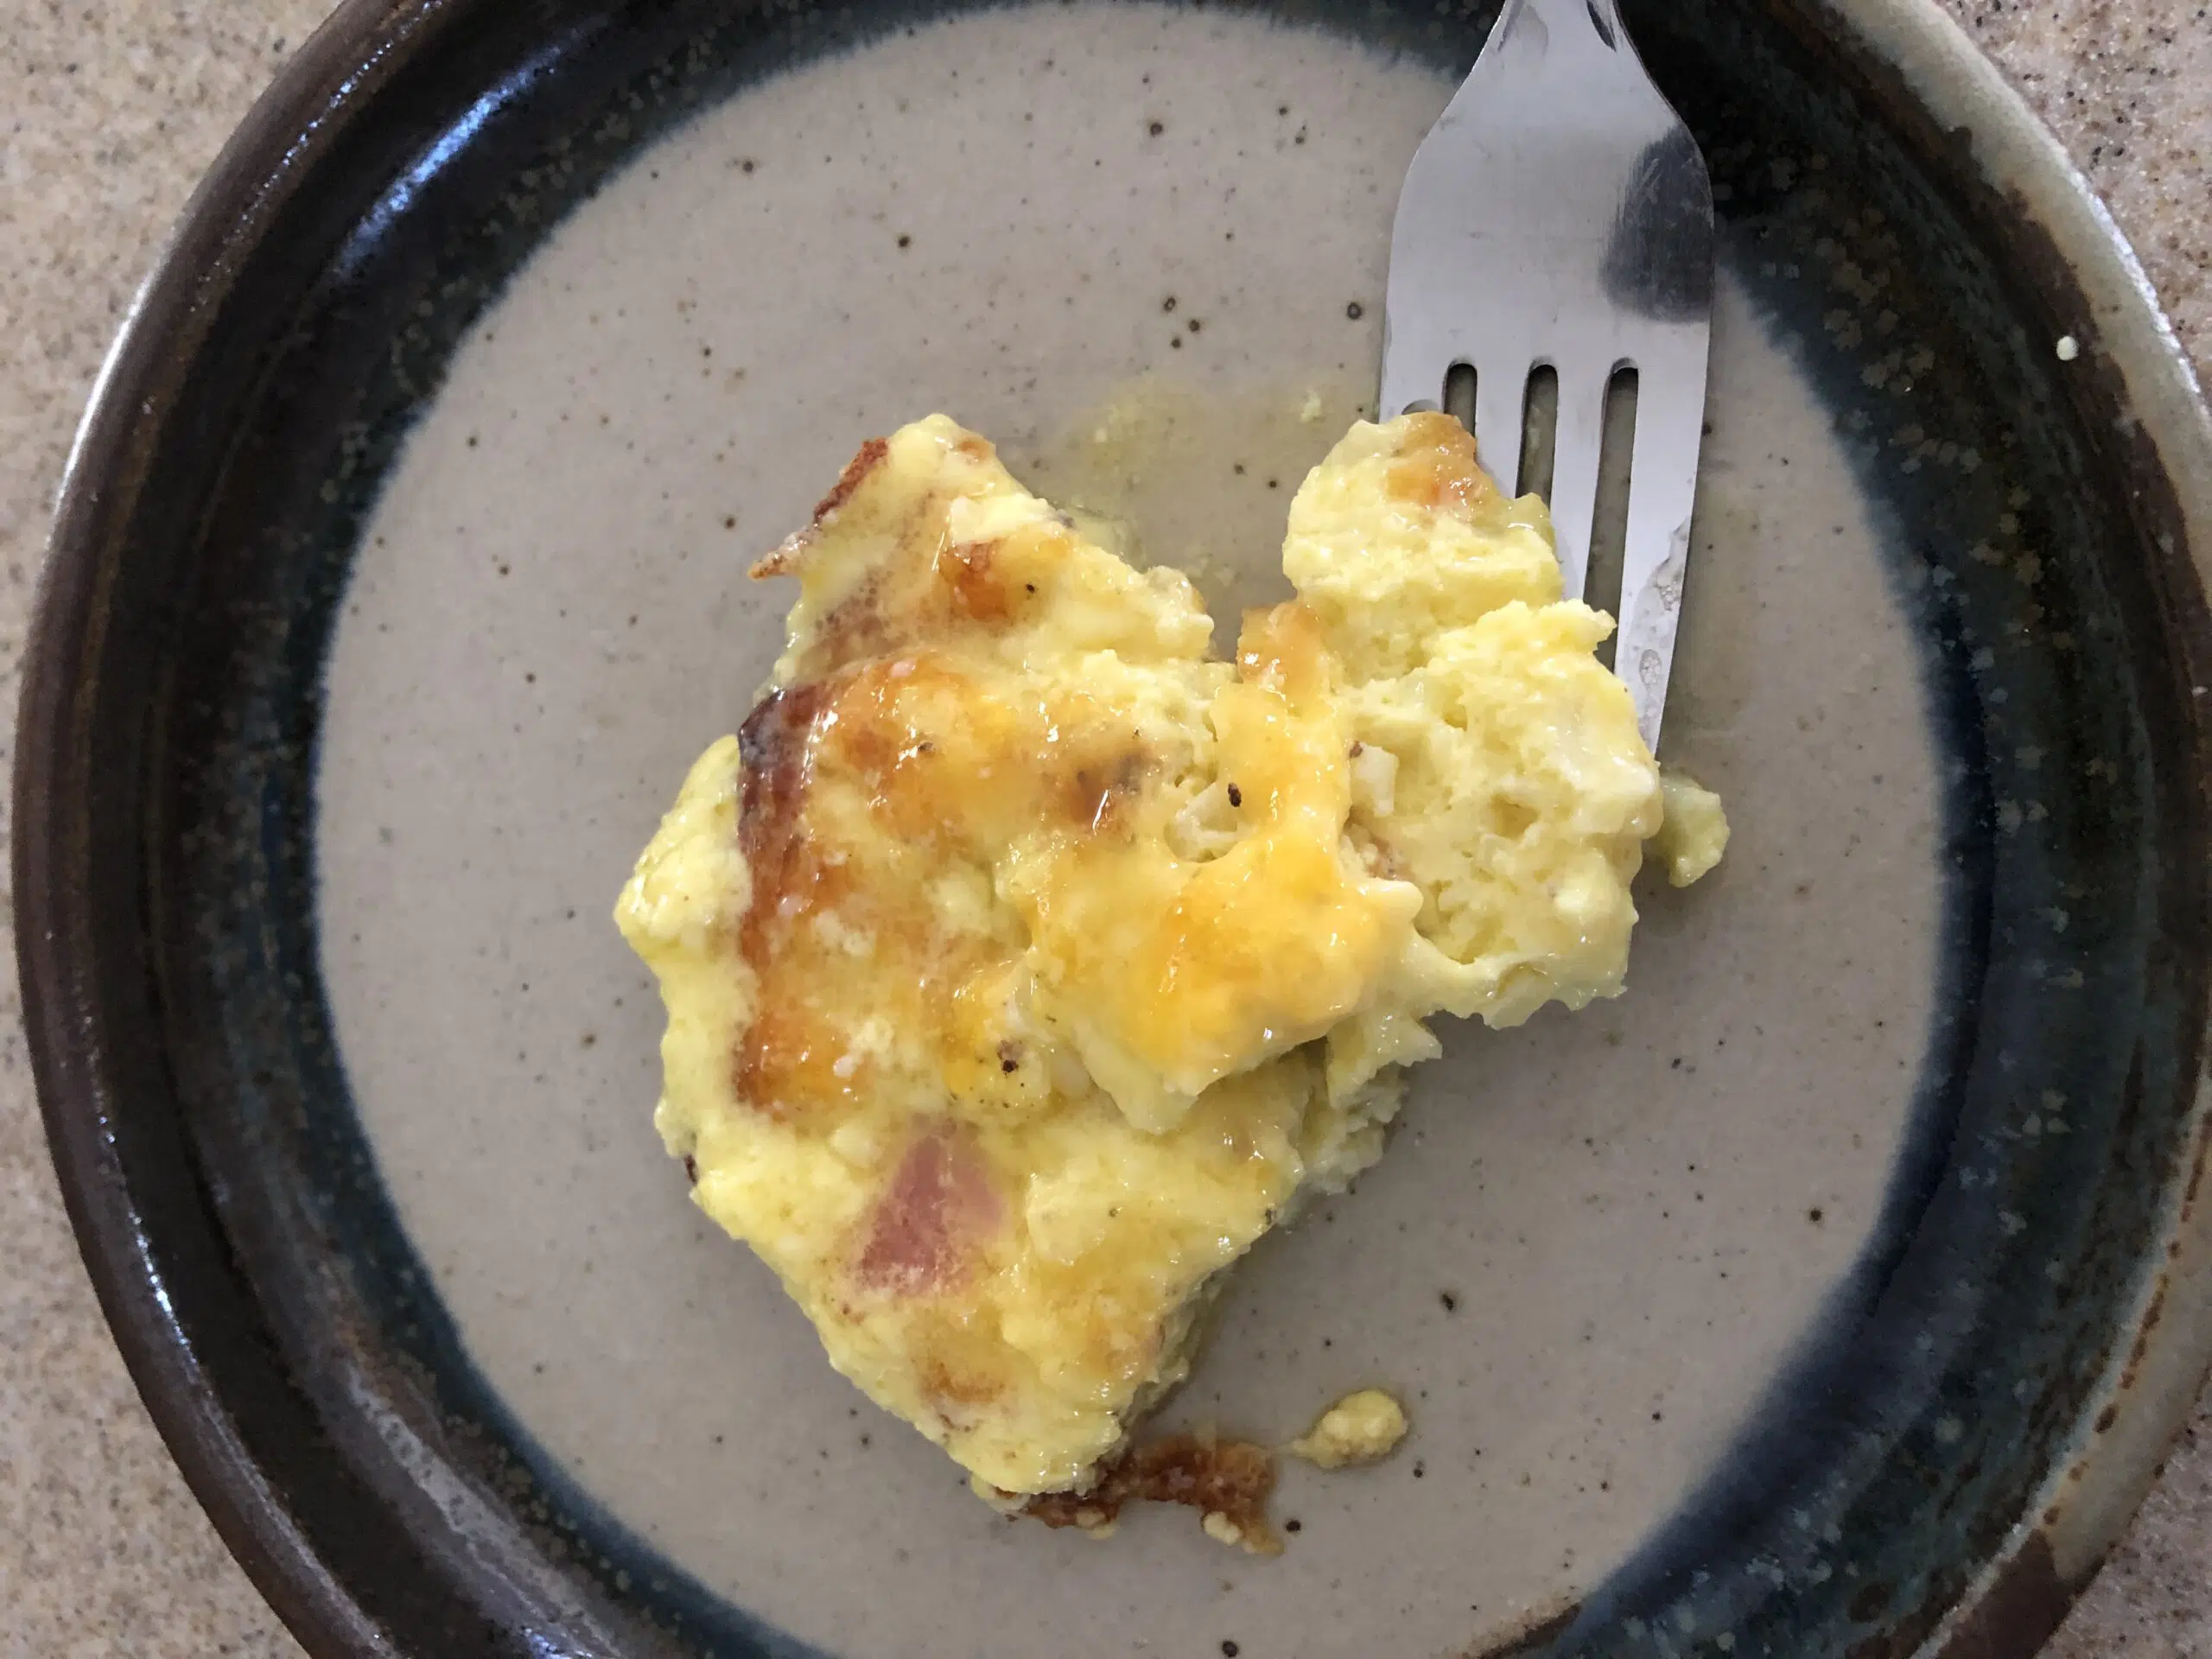 keto eggs benedict on stoneware plate with fork